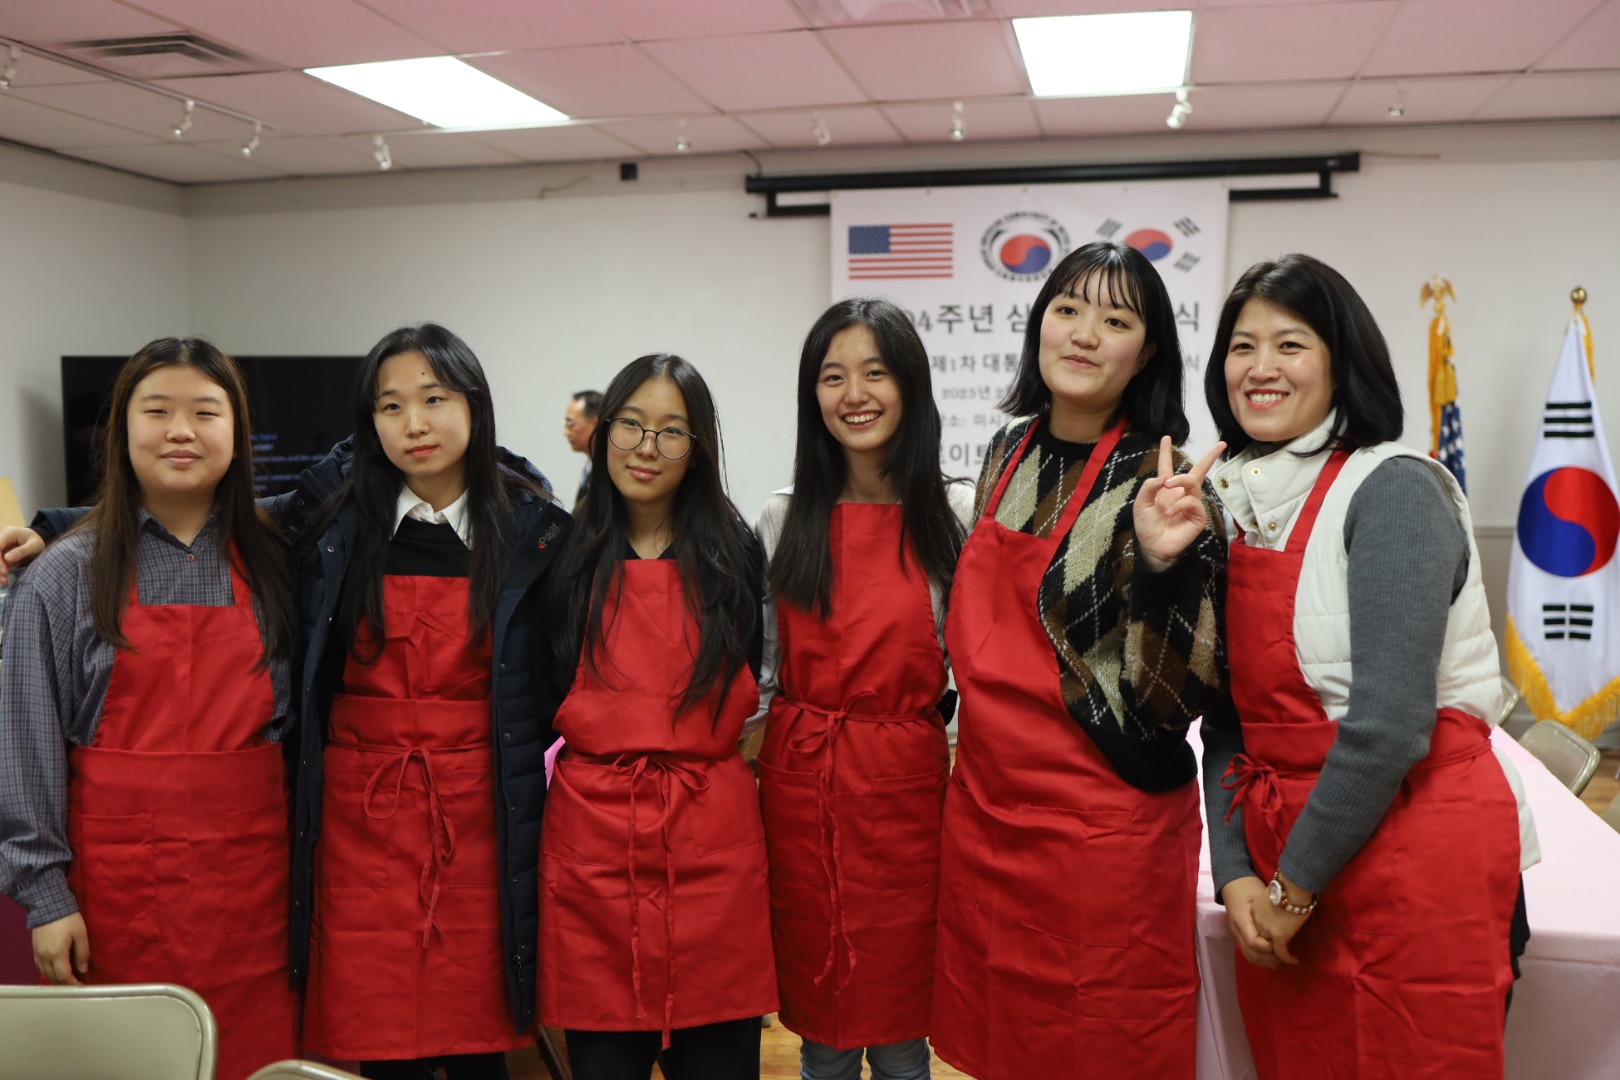 Student volunteers, who helped serve dinner, pose for a group photo